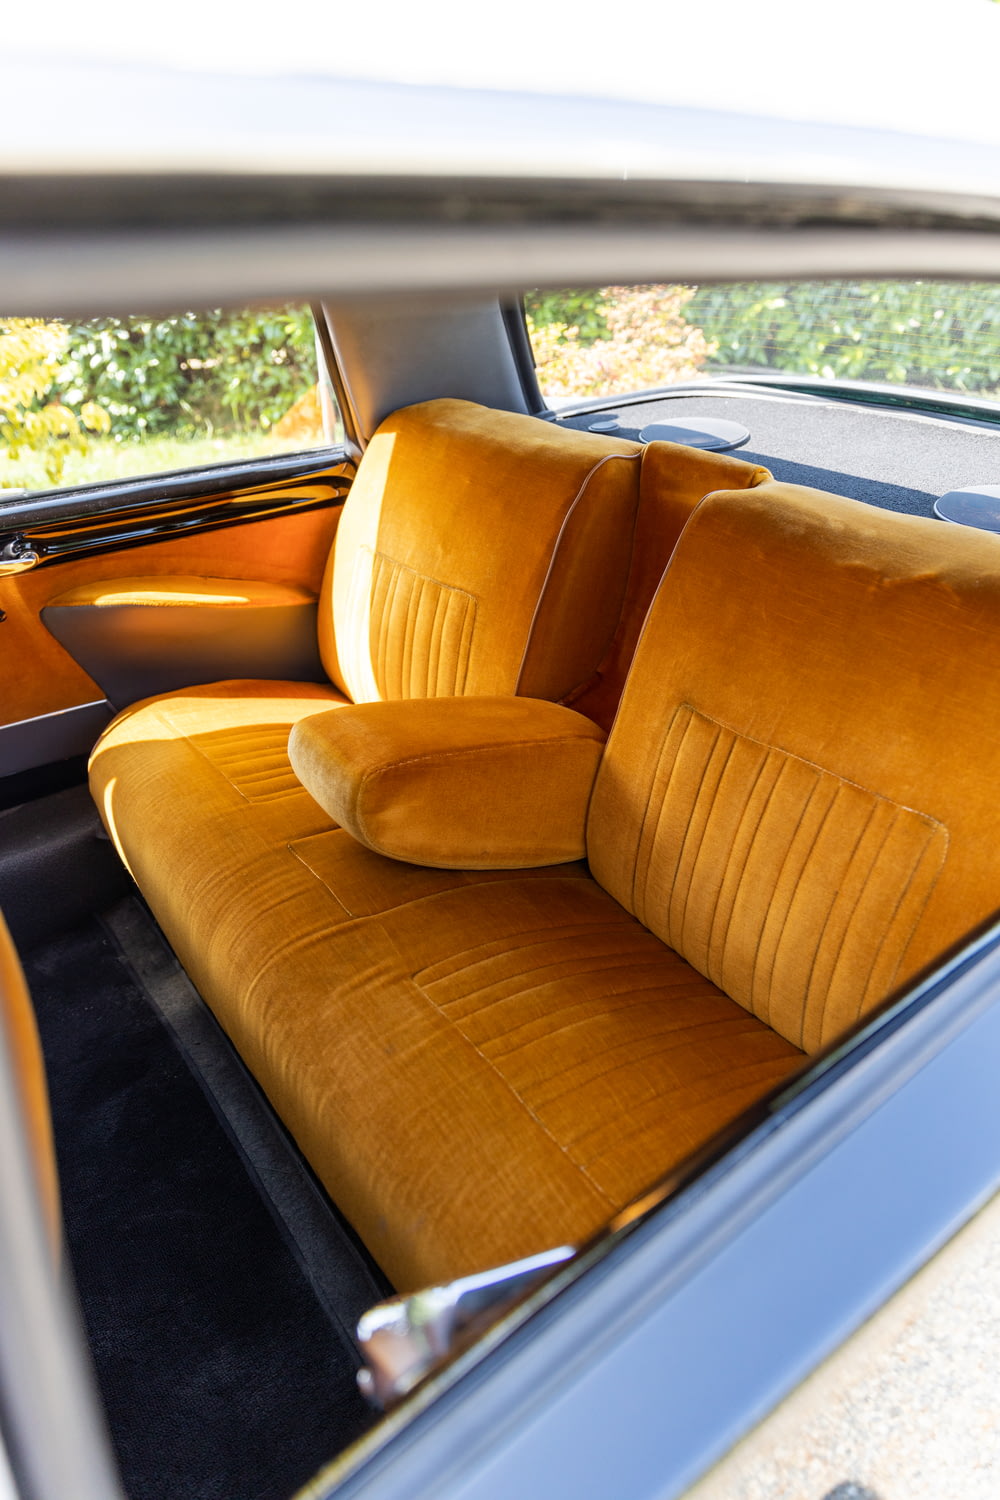 the interior of a car with a yellow seat